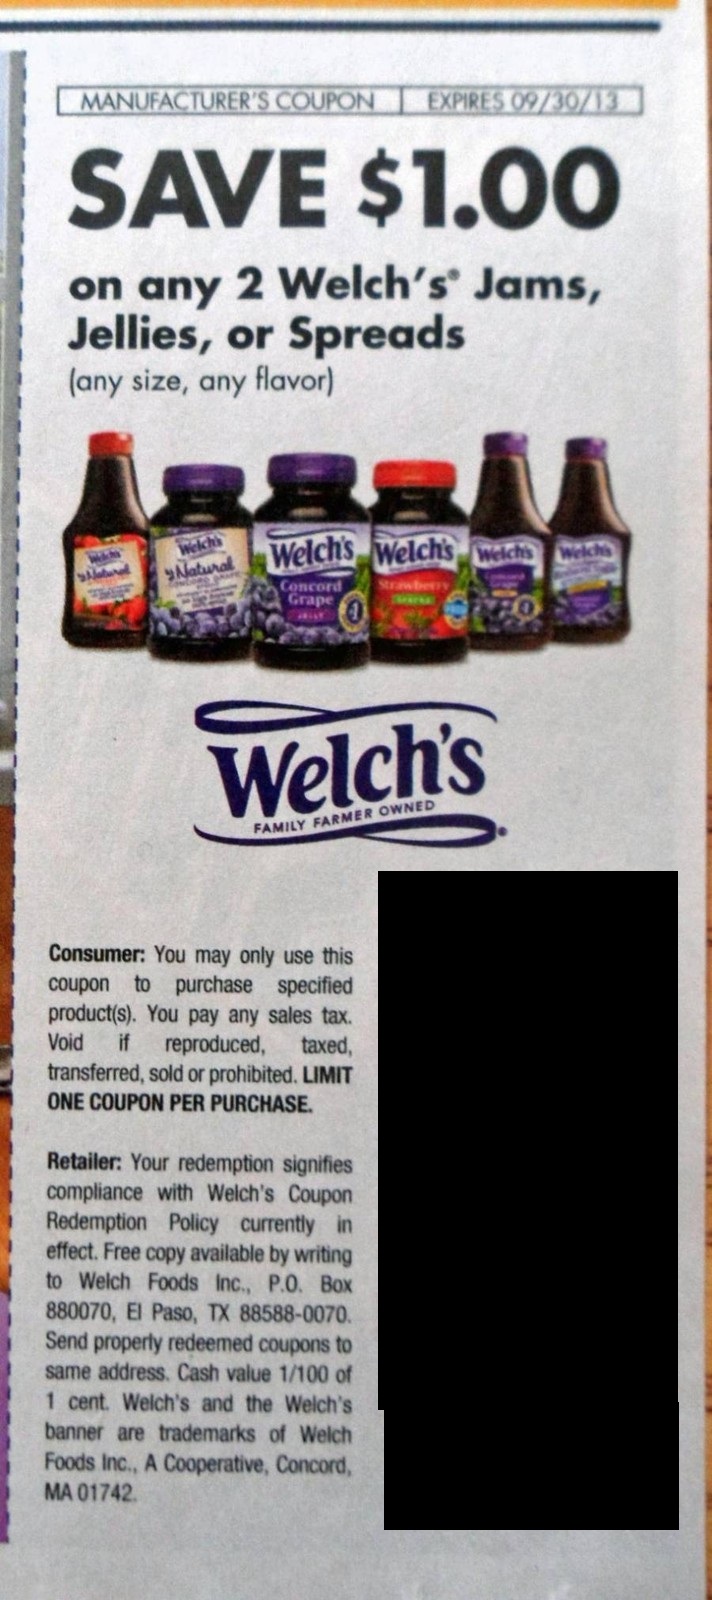 Save $1.00 on any 2 Welch's Jams, Jellies, or Spreads (Any size, any flavor) Expires 09/30/2013